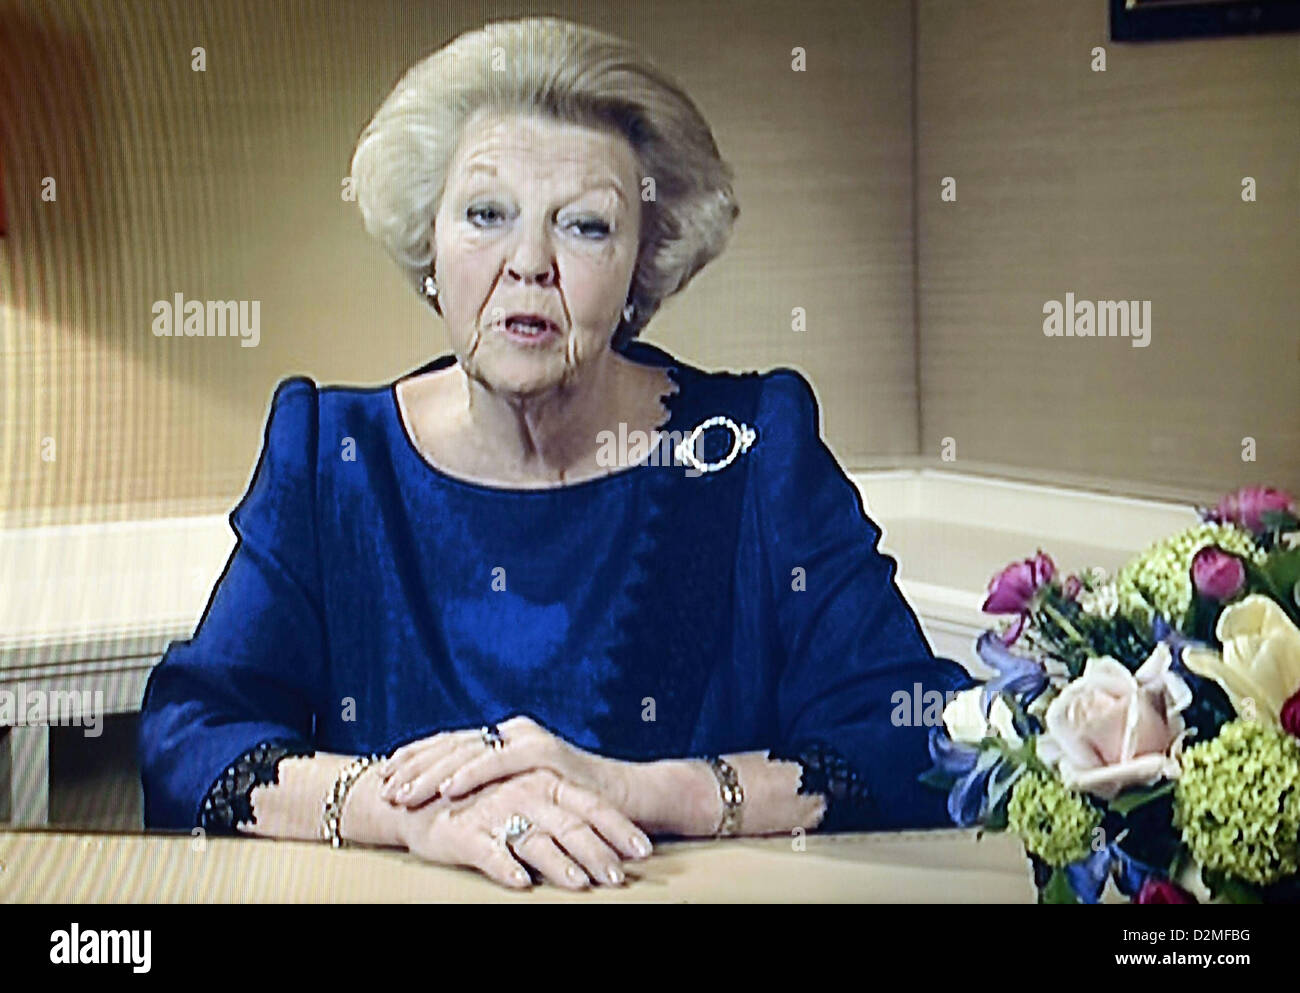 A television grab taken from Dutch TV channel NOS shows Dutch Queen Beatrix announcing her abdication on 28 January 2013. Queen Beatrix announced on 28 January 2013, in a previously recorded speech, that she will abdicate and give the throne to Crown Prince Willem-Alexander on 30 April 2013. EPA/NOS / HANDOUT HANDOUT EDITORIAL USE ONLY/NO SALES  (Quality Repeat) Stock Photo